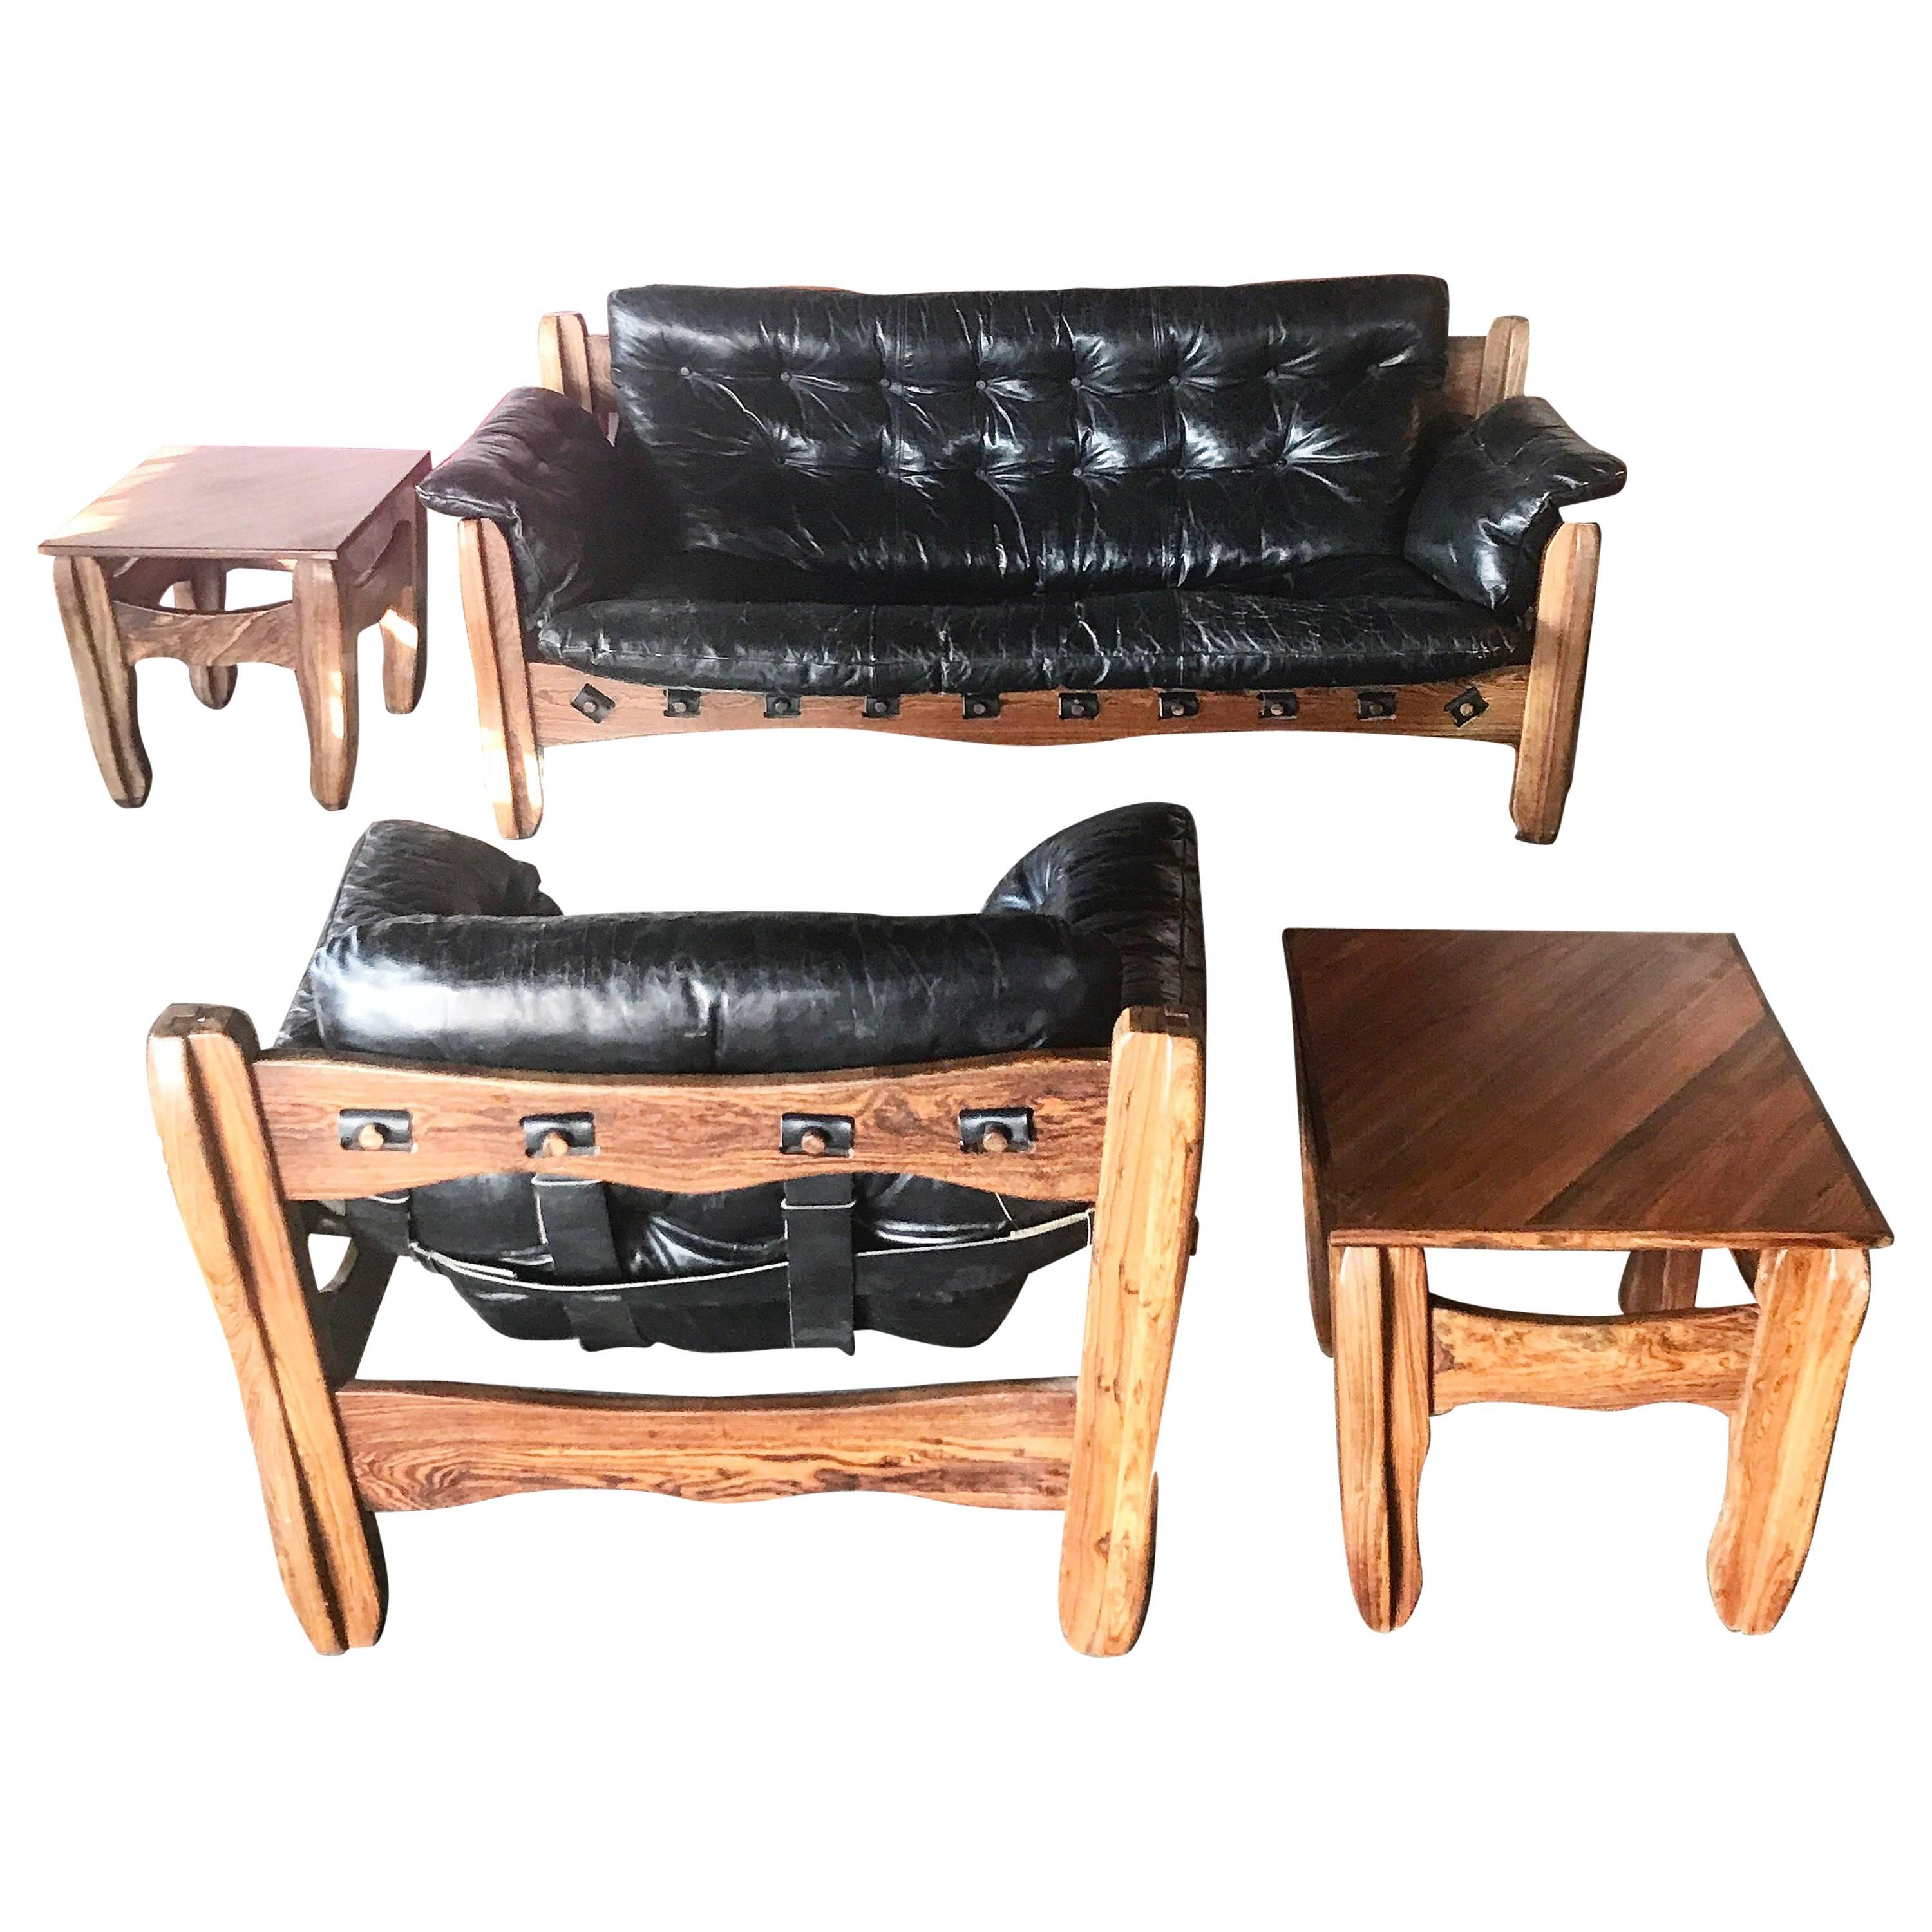 Don Shoemaker "Descanso" Sofa, Chair and Pair of Tables Cocobolo and Leather